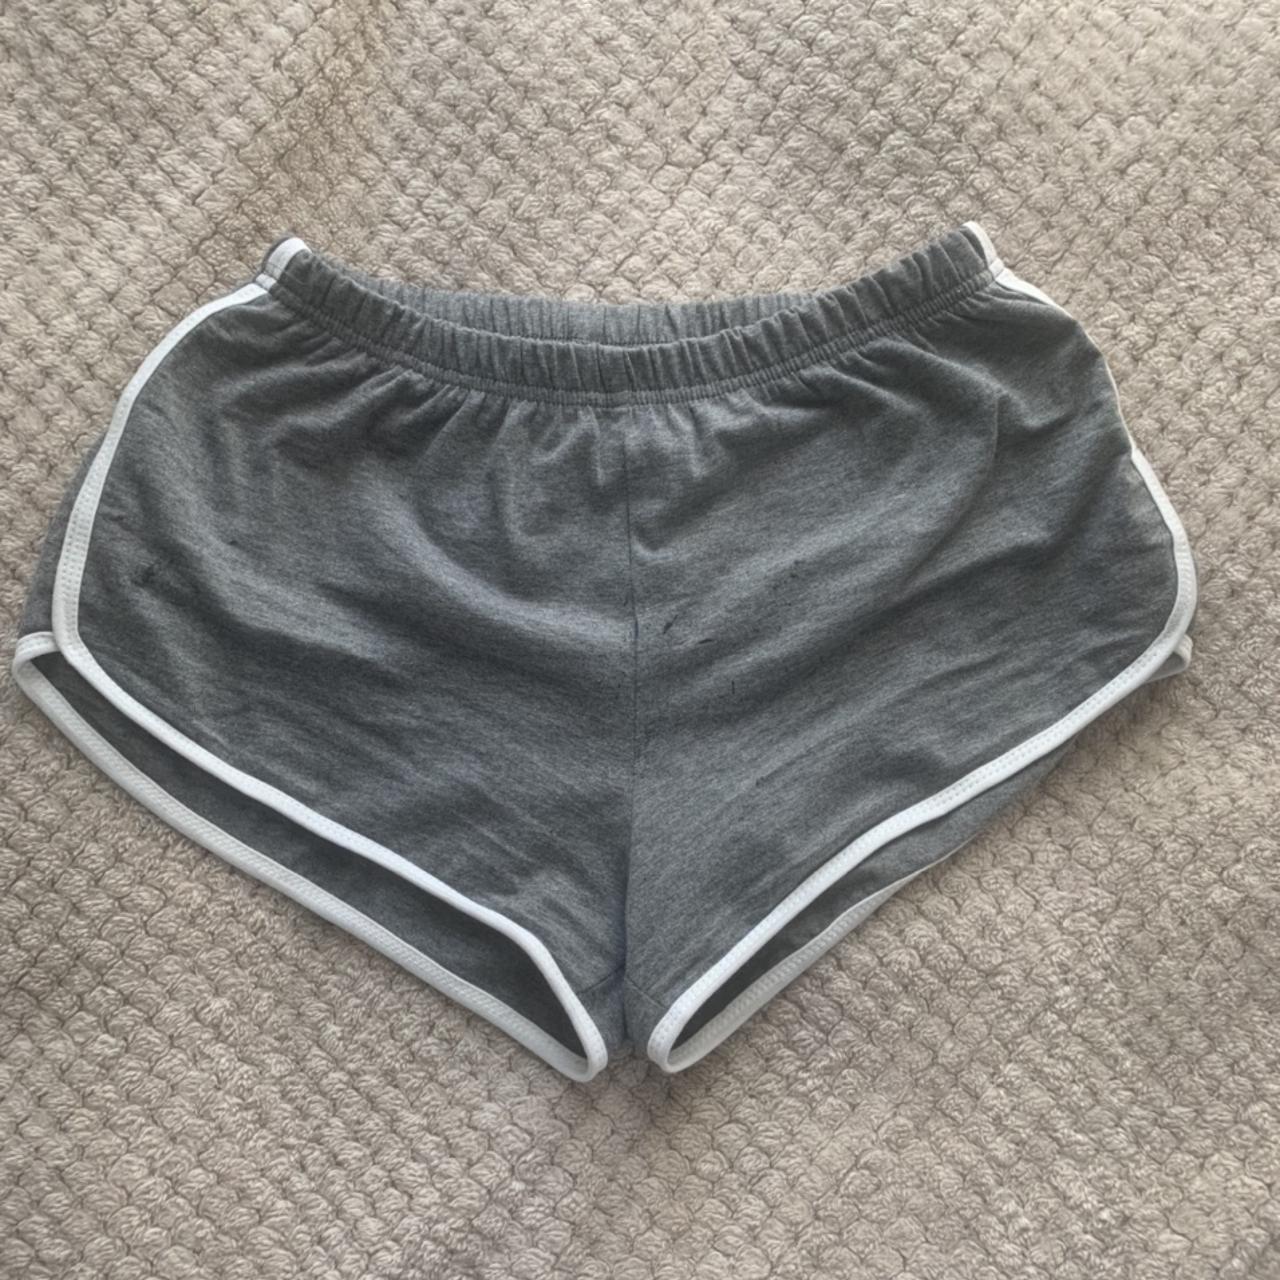 WORN ONCE!!!!! LULULEMON DUPES! SIZE SMALL BUT FIT A - Depop